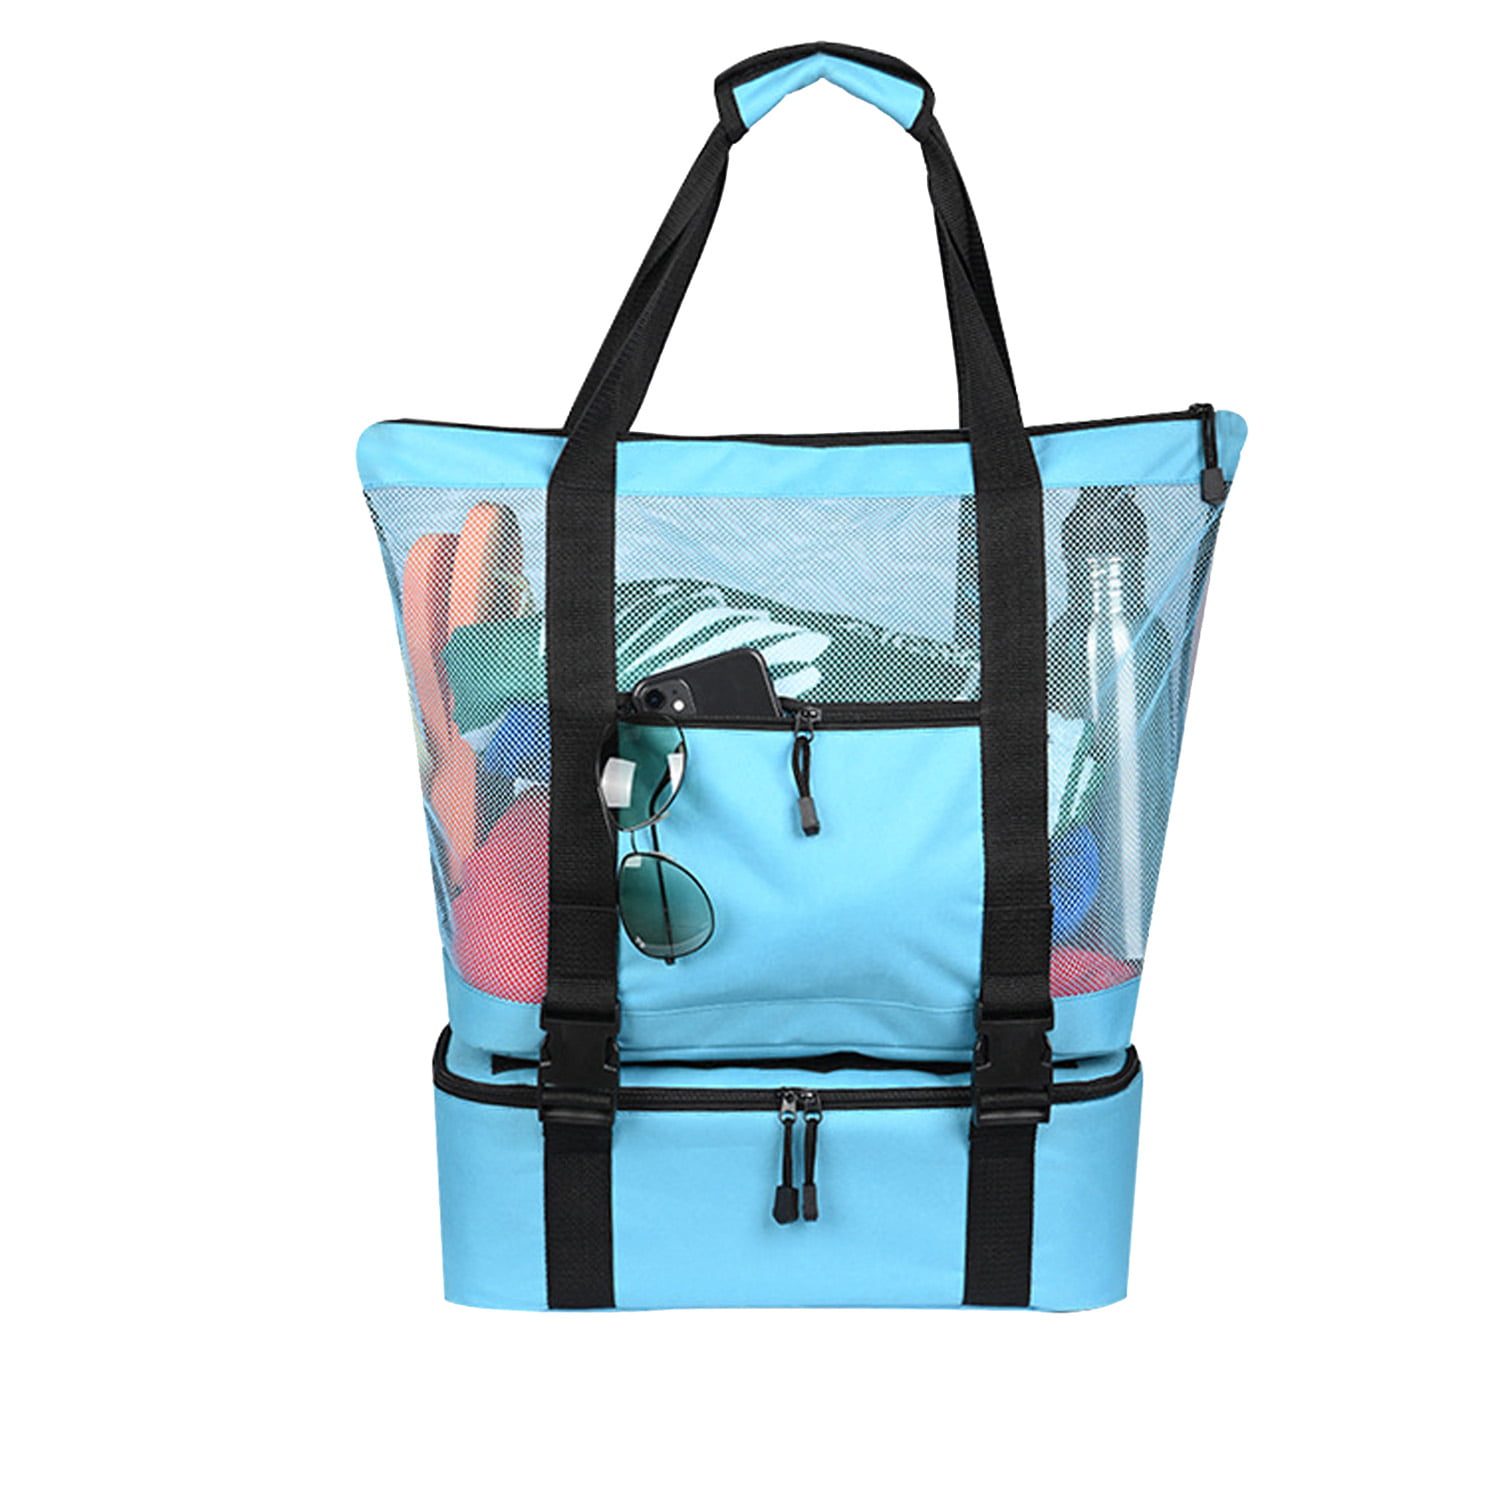 Beach t Camping and More Mesh Pool Bag With Pockets for Swimming Cats Character Mesh Swim Bag